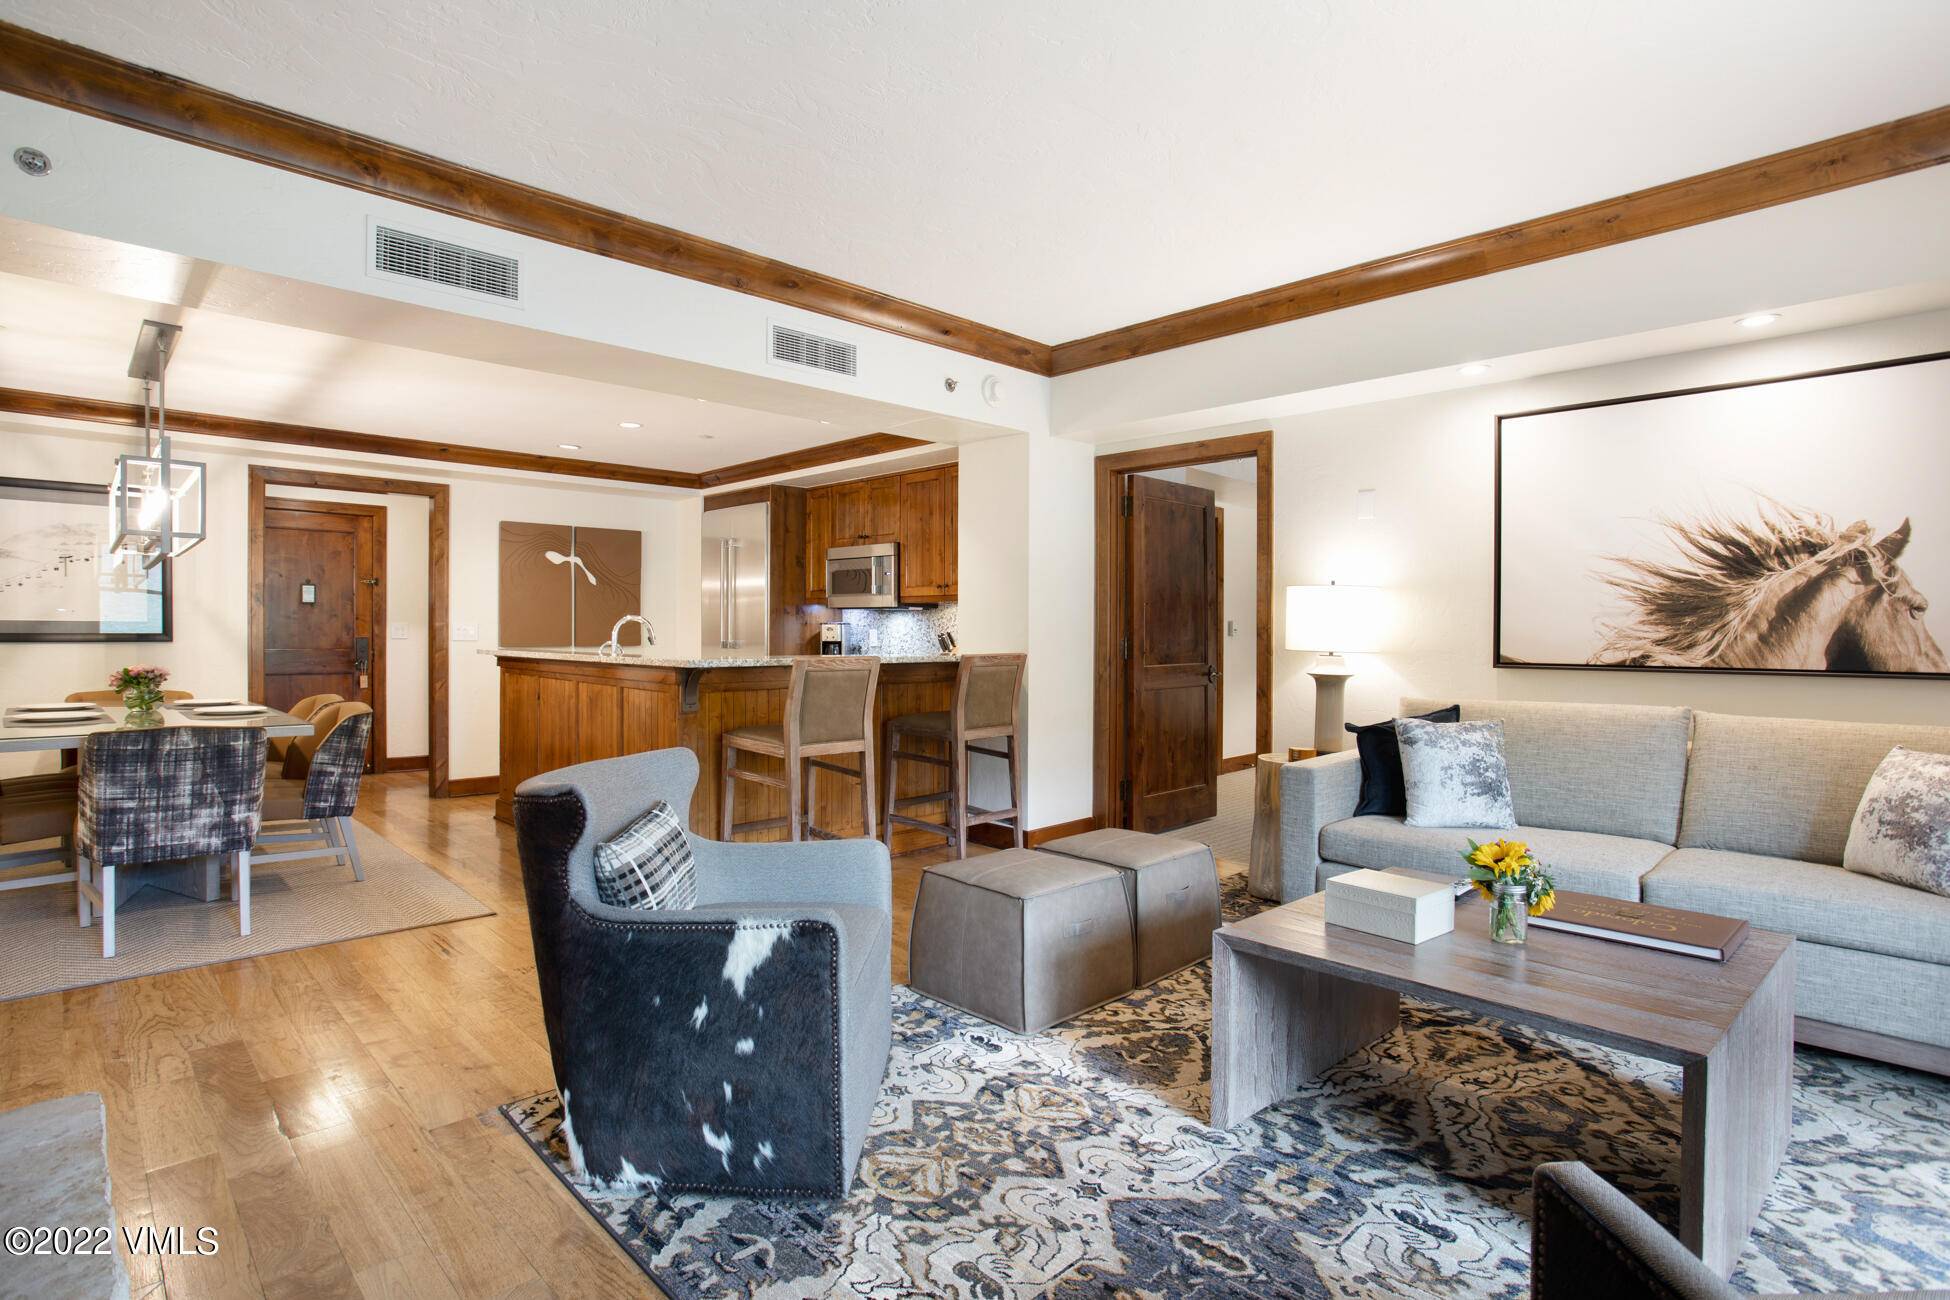 This 3 bedroom residence is connected to The Ritz Carlton, Bachelor Gulch.